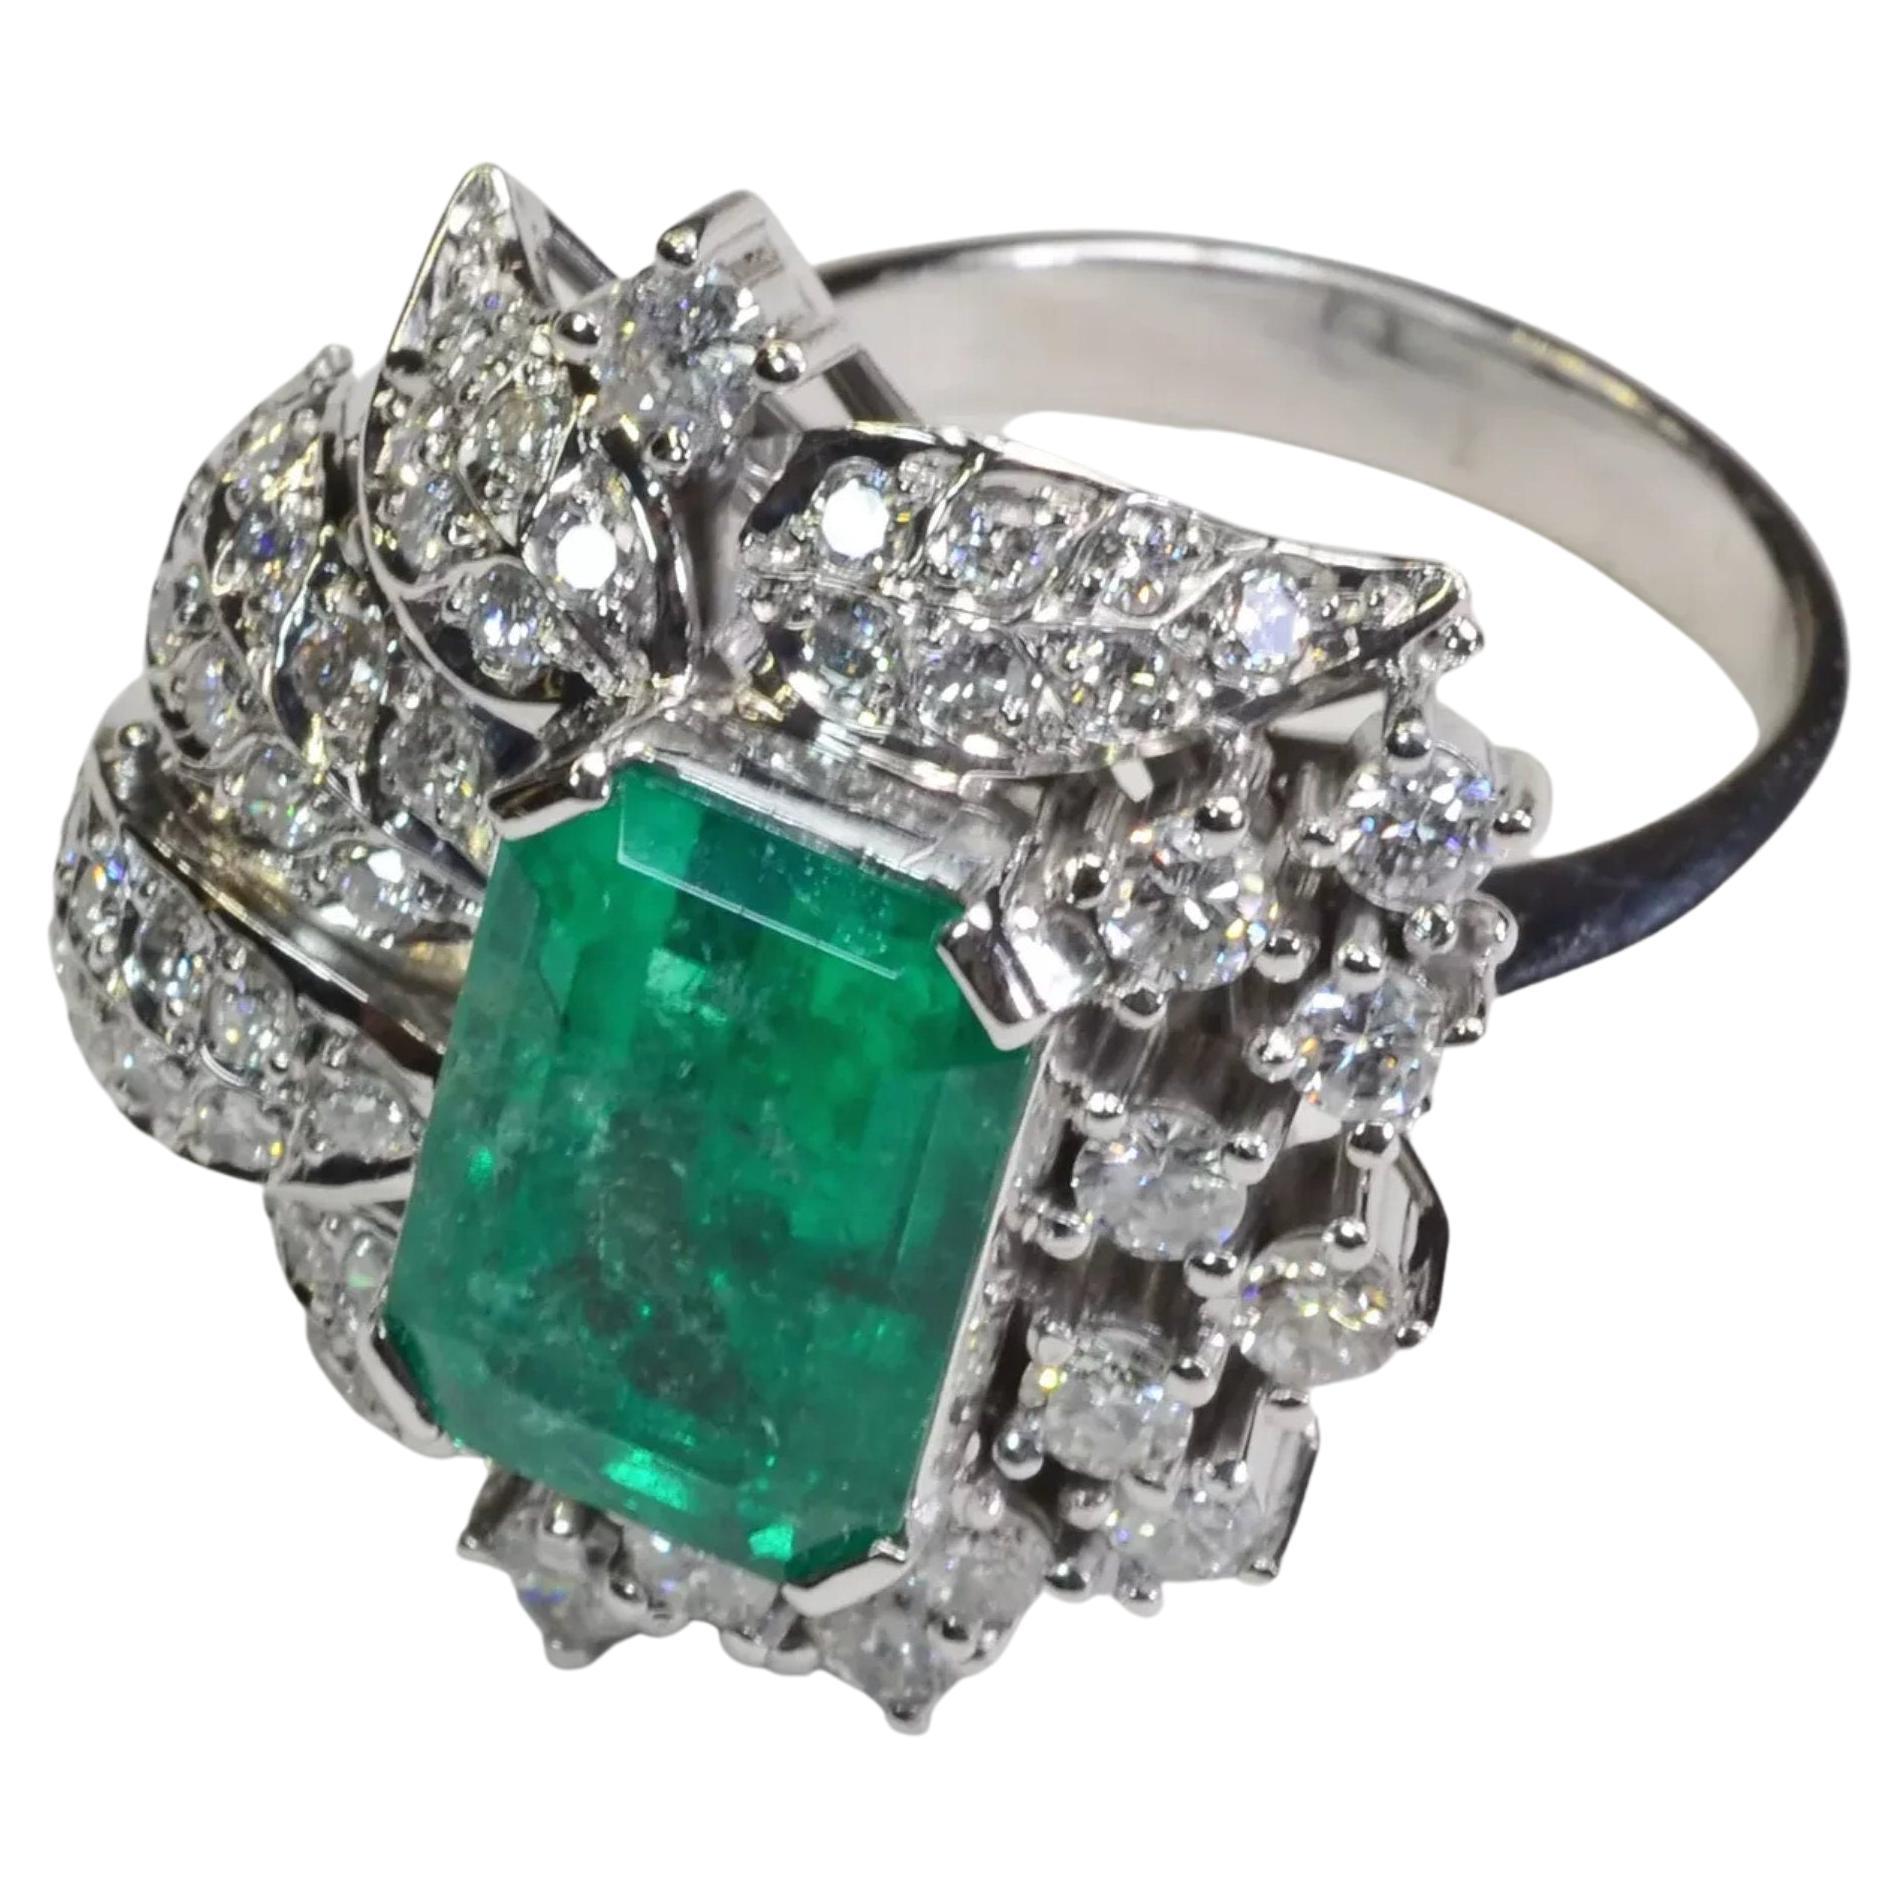 3 Carat Colombian Emerald Diamond Engagement Wedding Ring White Gold Cocktail 